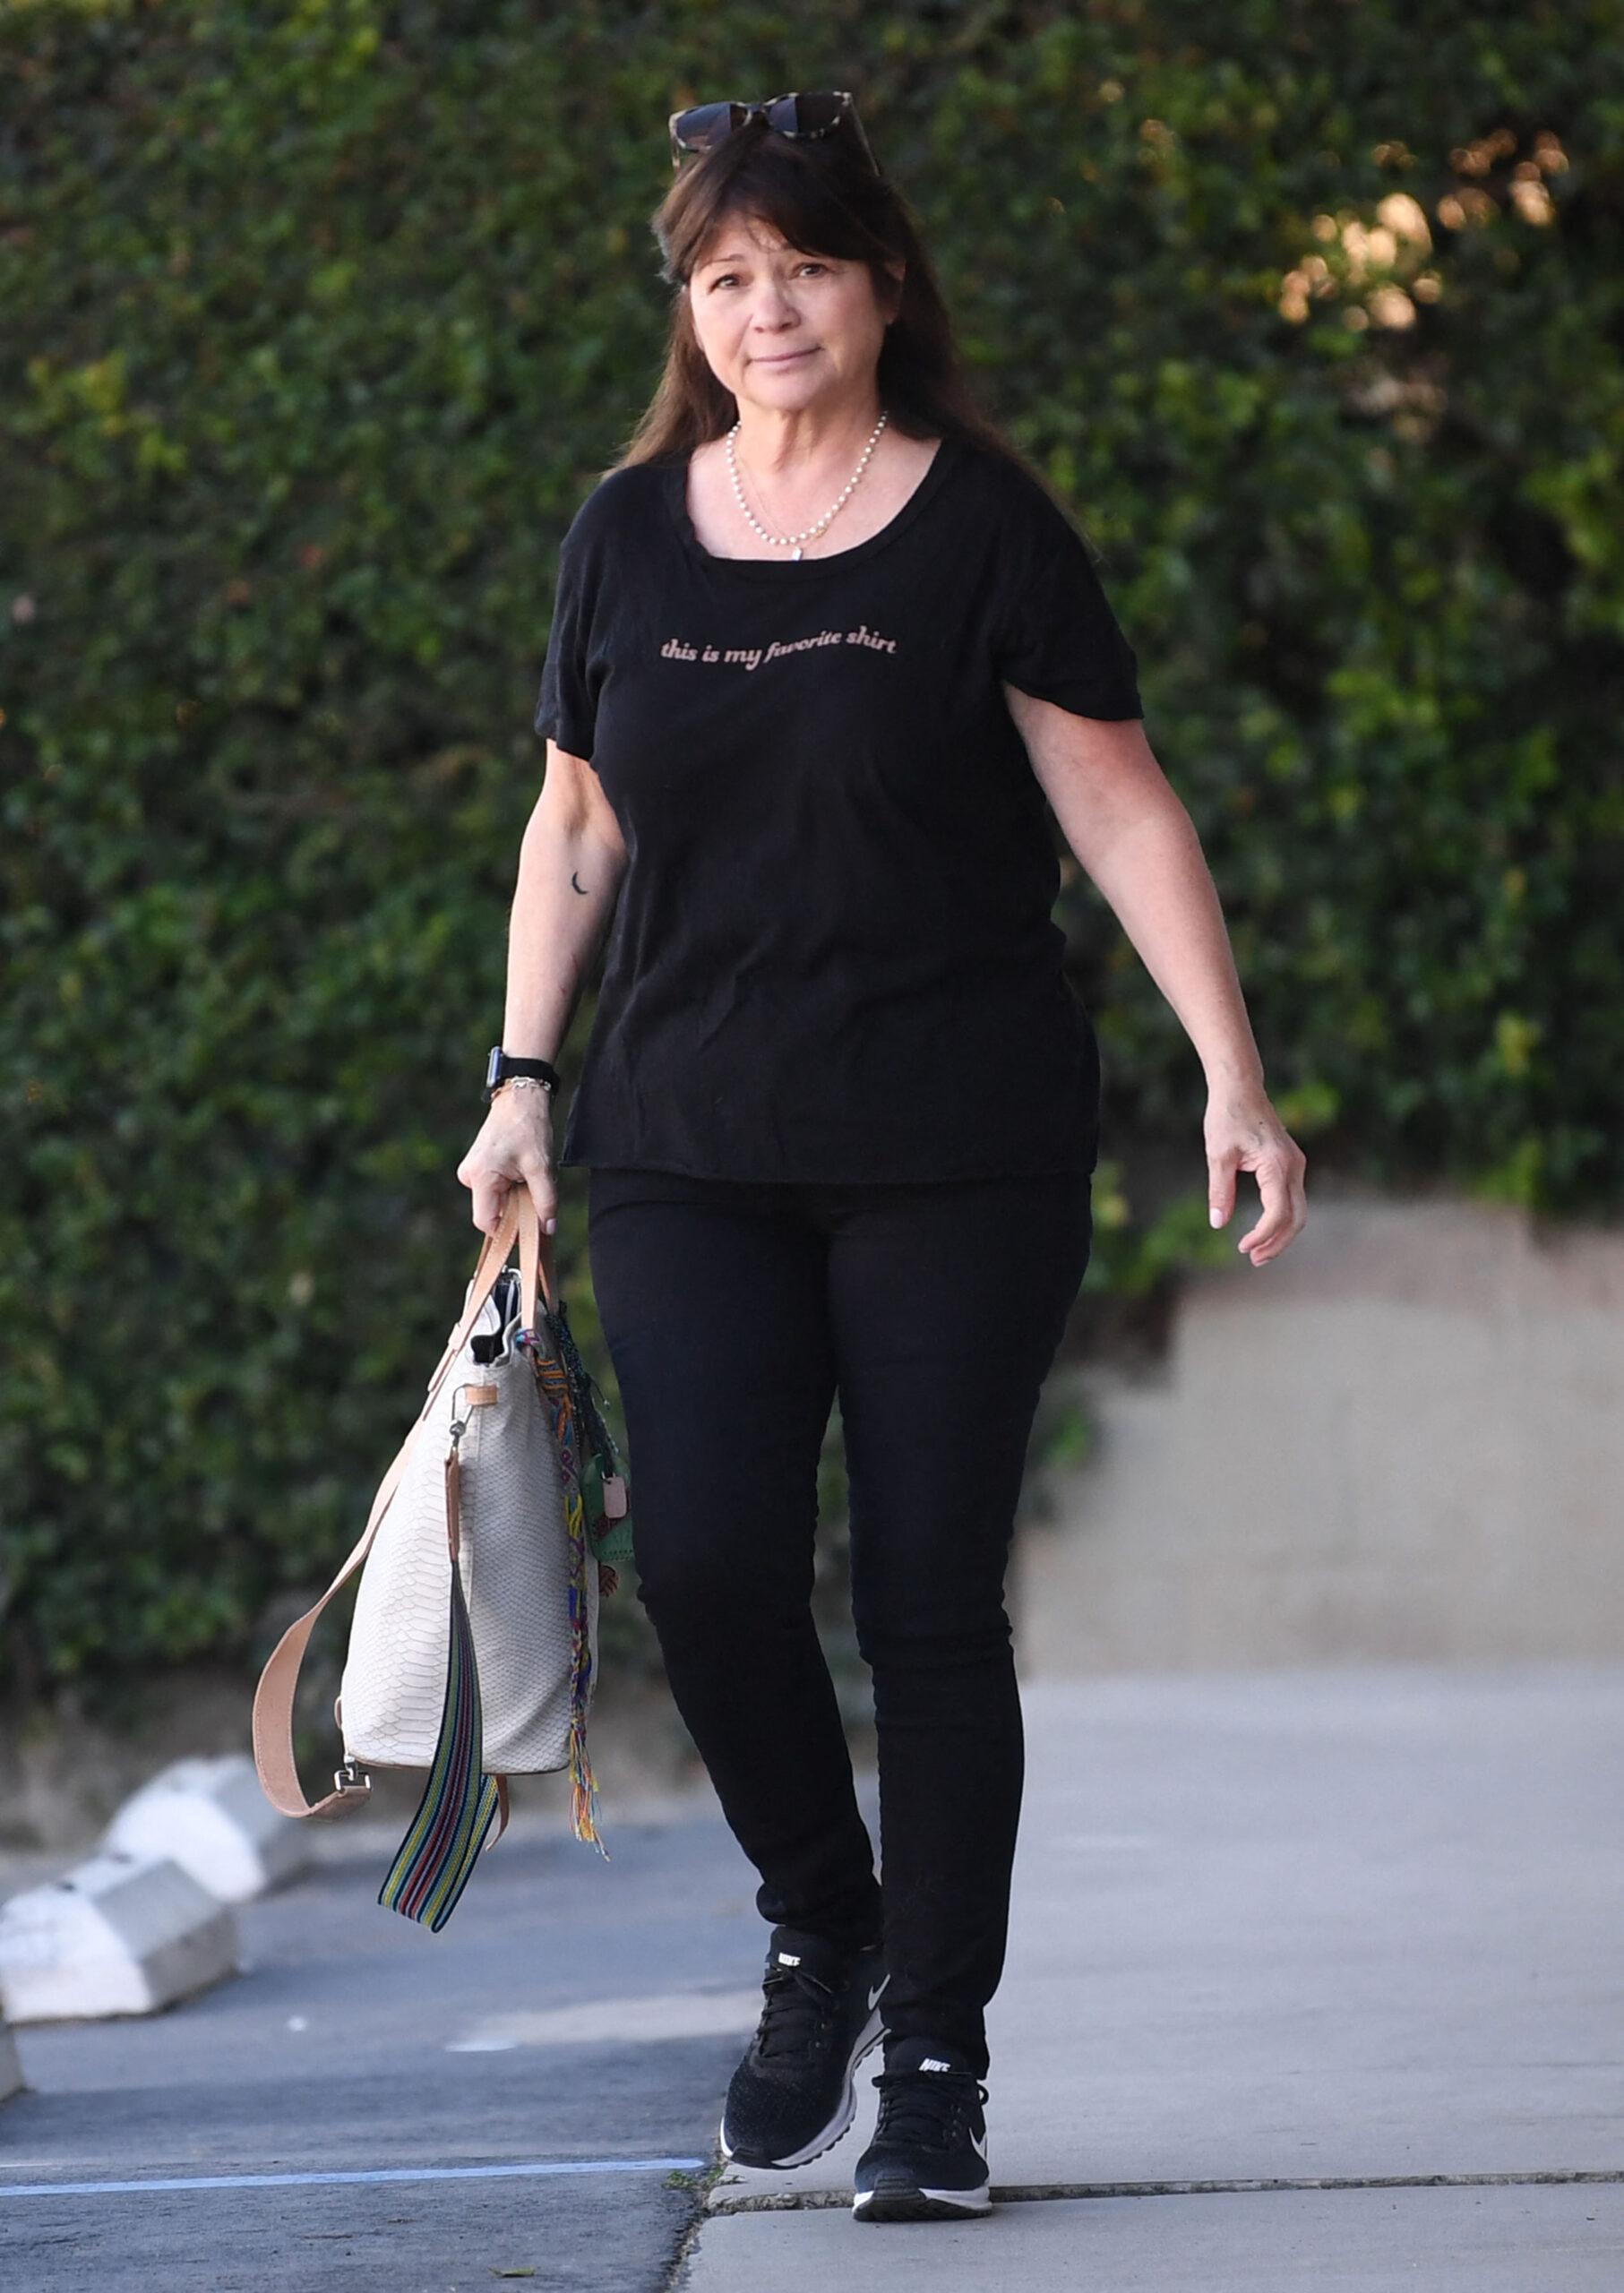 Valerie Bertinelli steps out after paying tribute to ex-fling Matthew Perry posting 